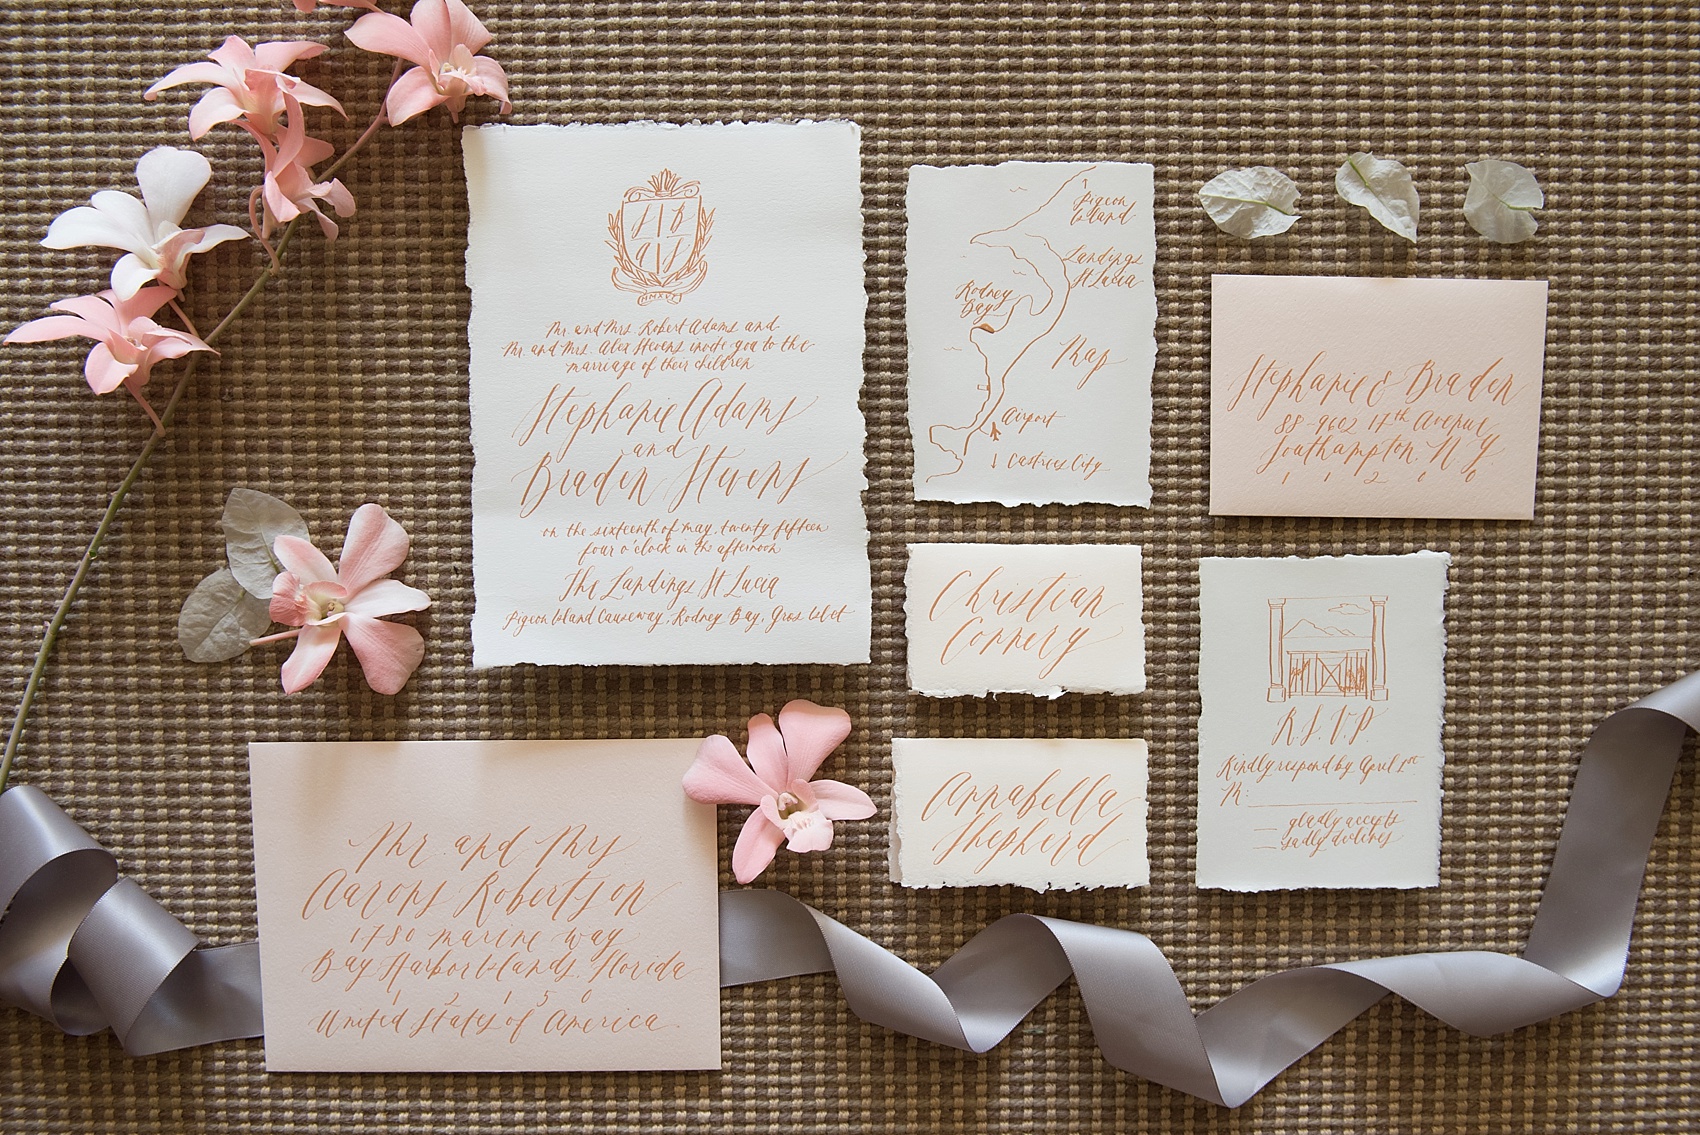 St. Lucia destination wedding beach elopement by Mikkel Paige Photography, at The Landings. Custom calligraphy invitation by Written Word.